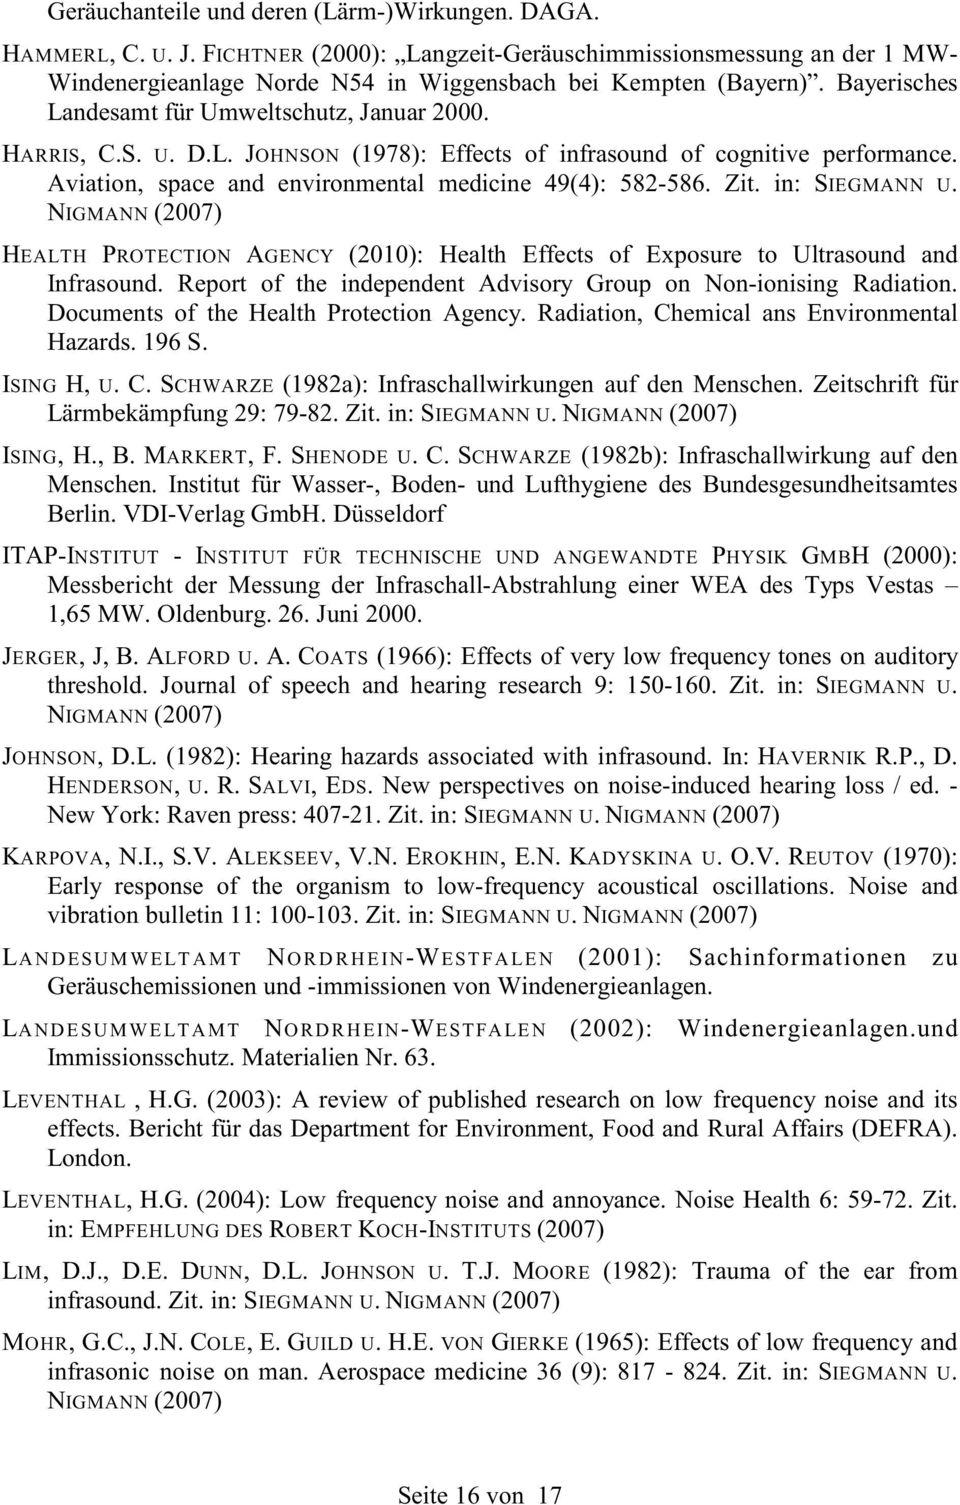 Zit. in: SIEGMANN U. NIGMANN (2007) HEALTH PROTECTION AGENCY (2010): Health Effects of Exposure to Ultrasound and Infrasound. Report of the independent Advisory Group on Non-ionising Radiation.